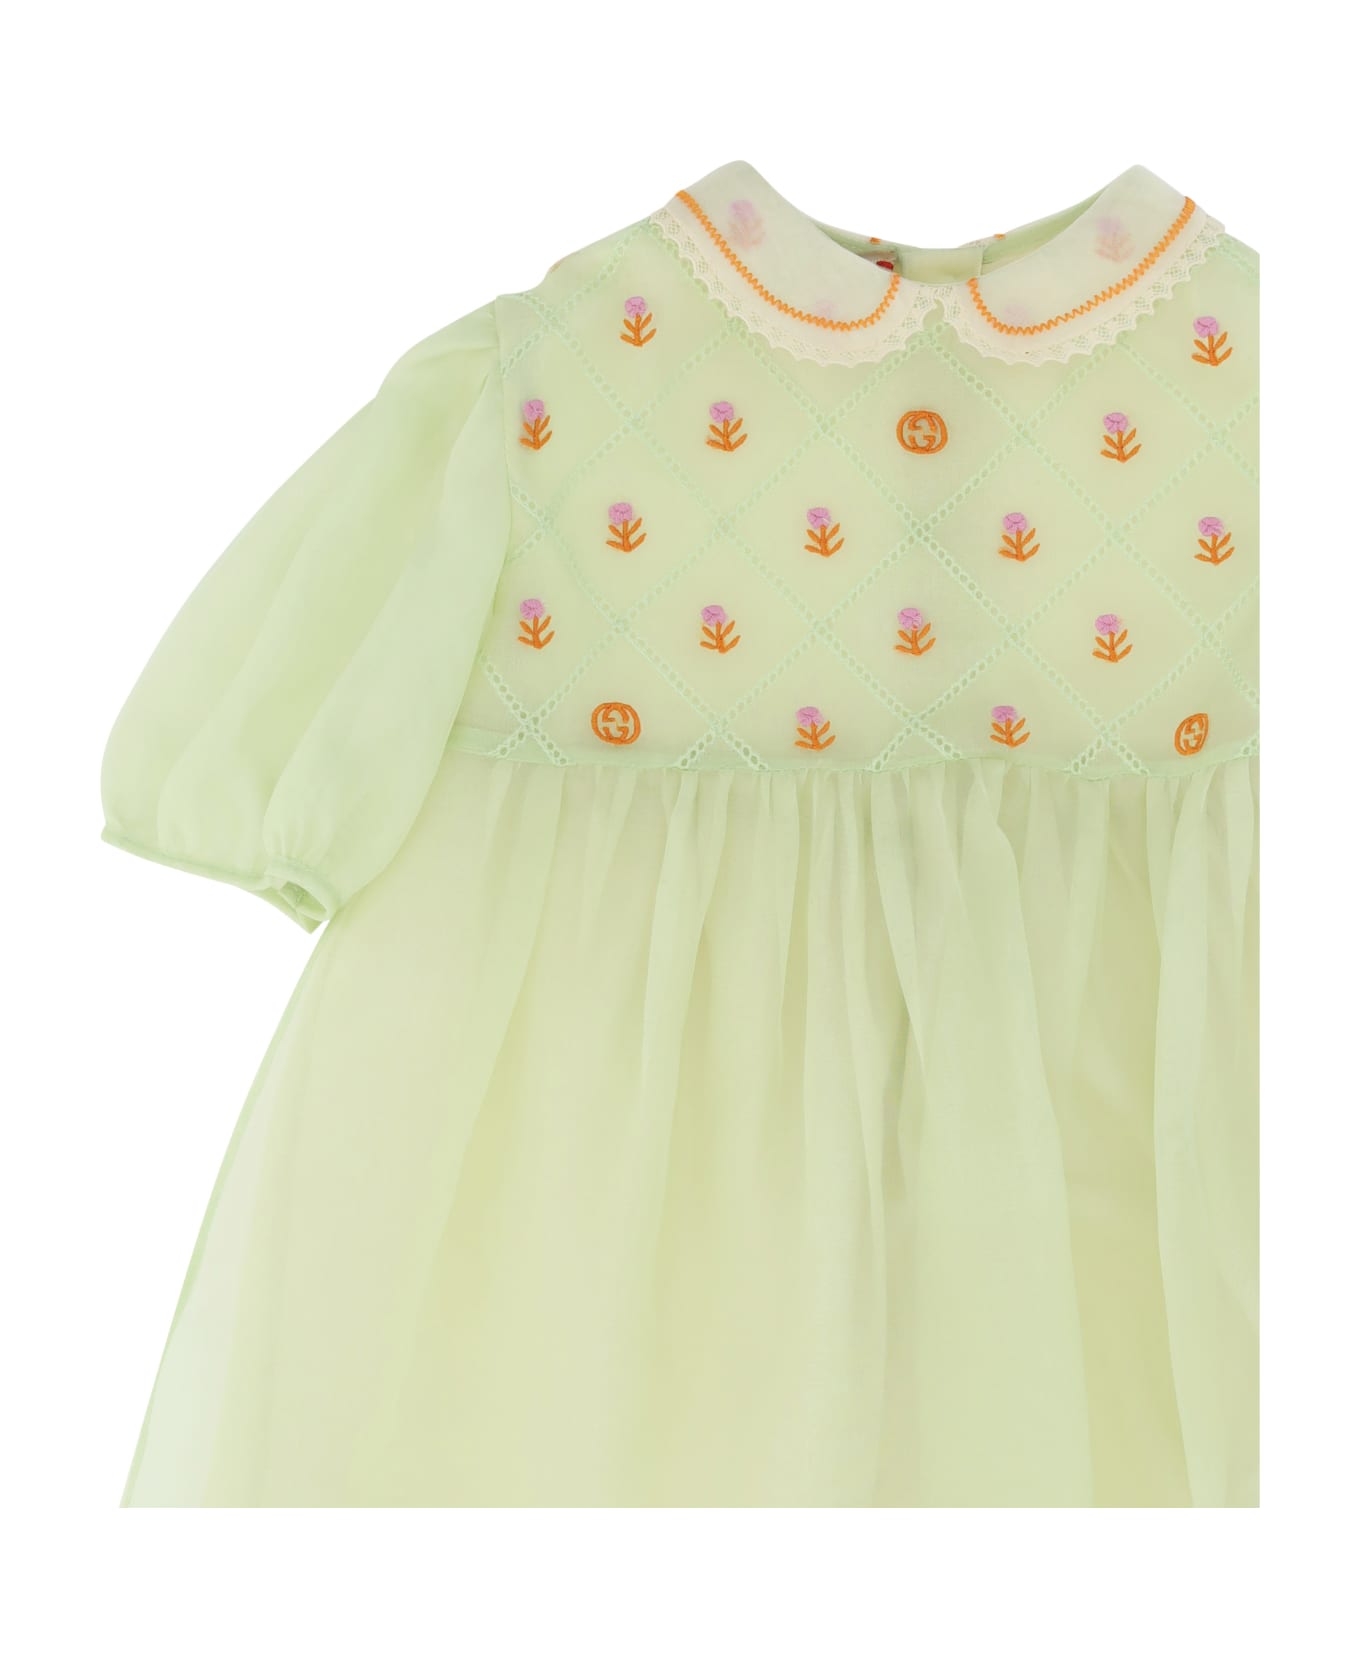 Gucci Dress For Girl - Pale Opal/mix